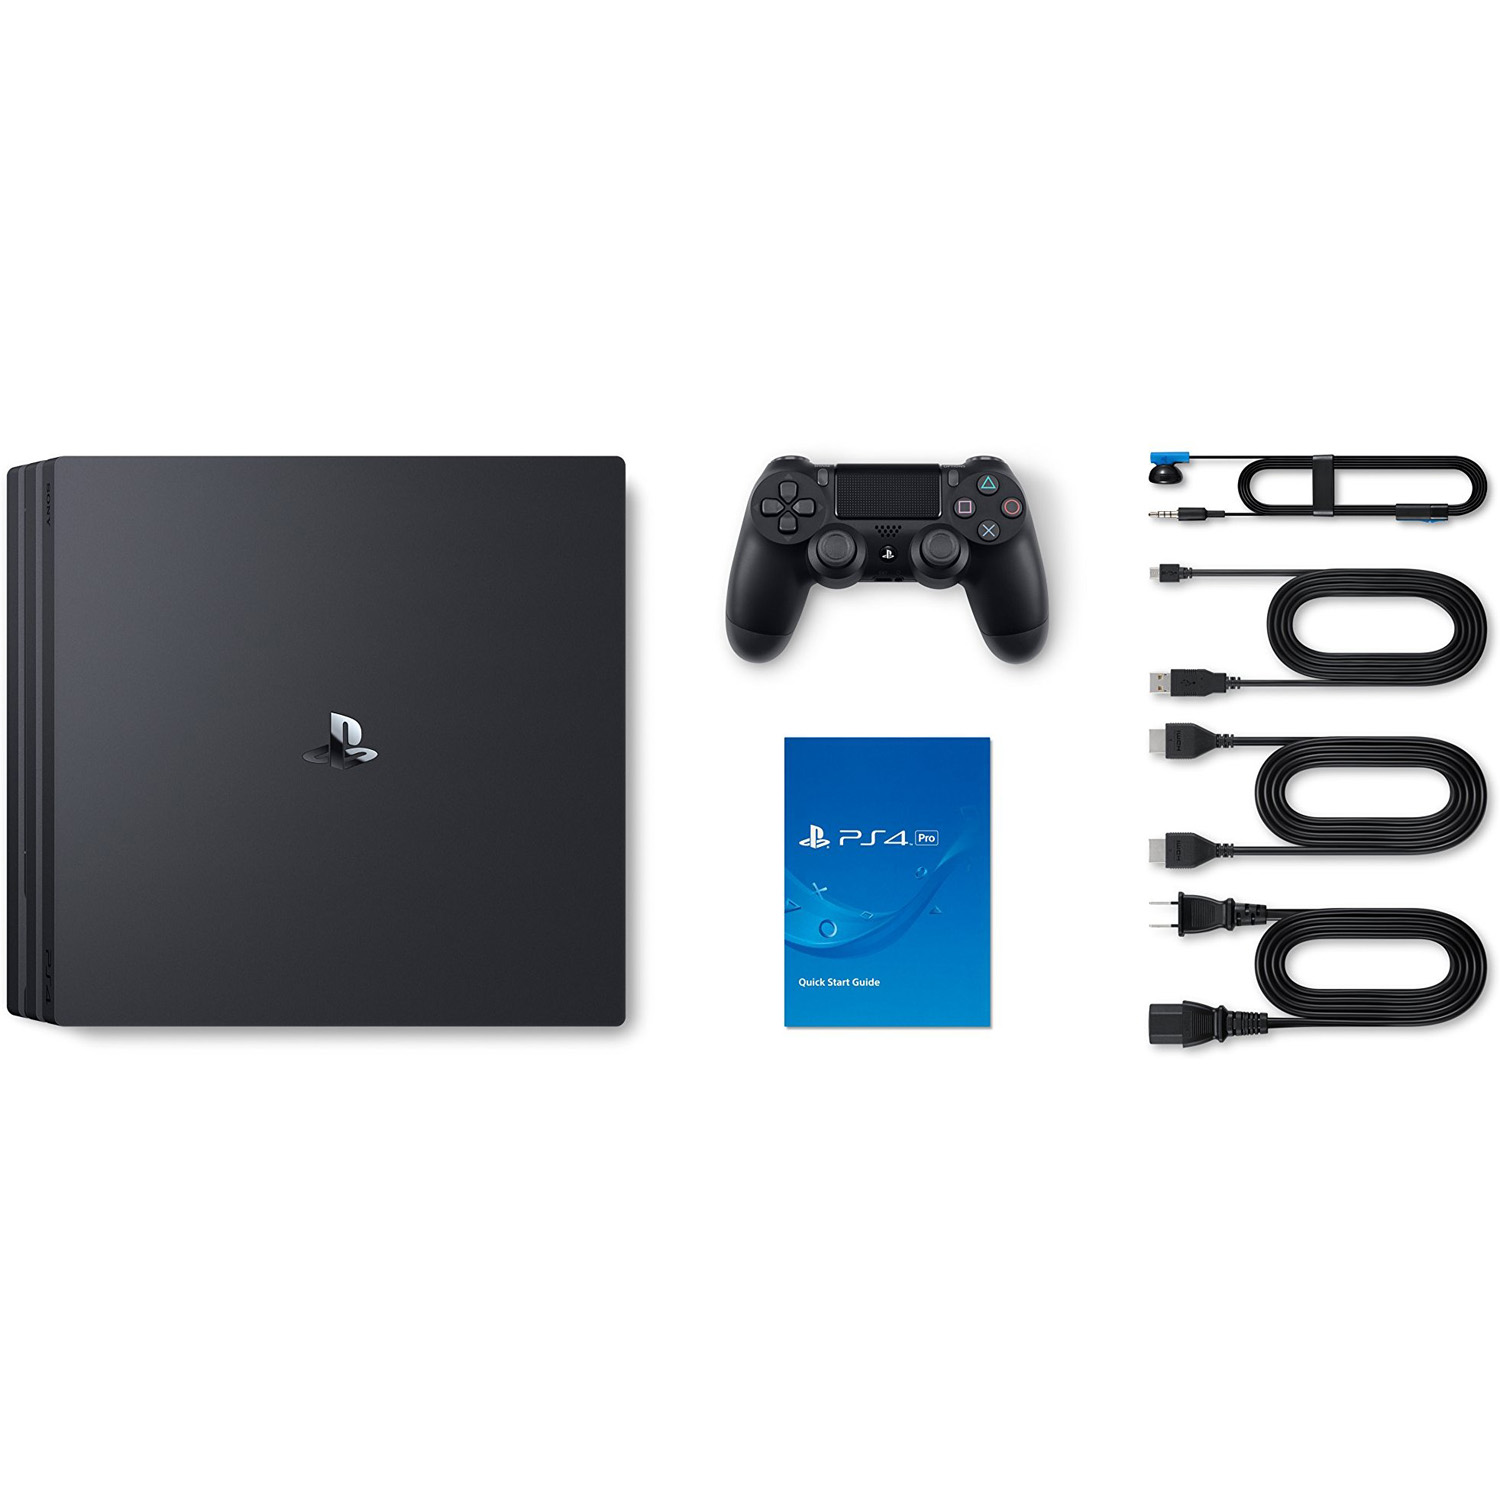 Sony PlayStation 4 Pro 1TB Gaming Console - Wireless Game Pad - Black - image 4 of 5